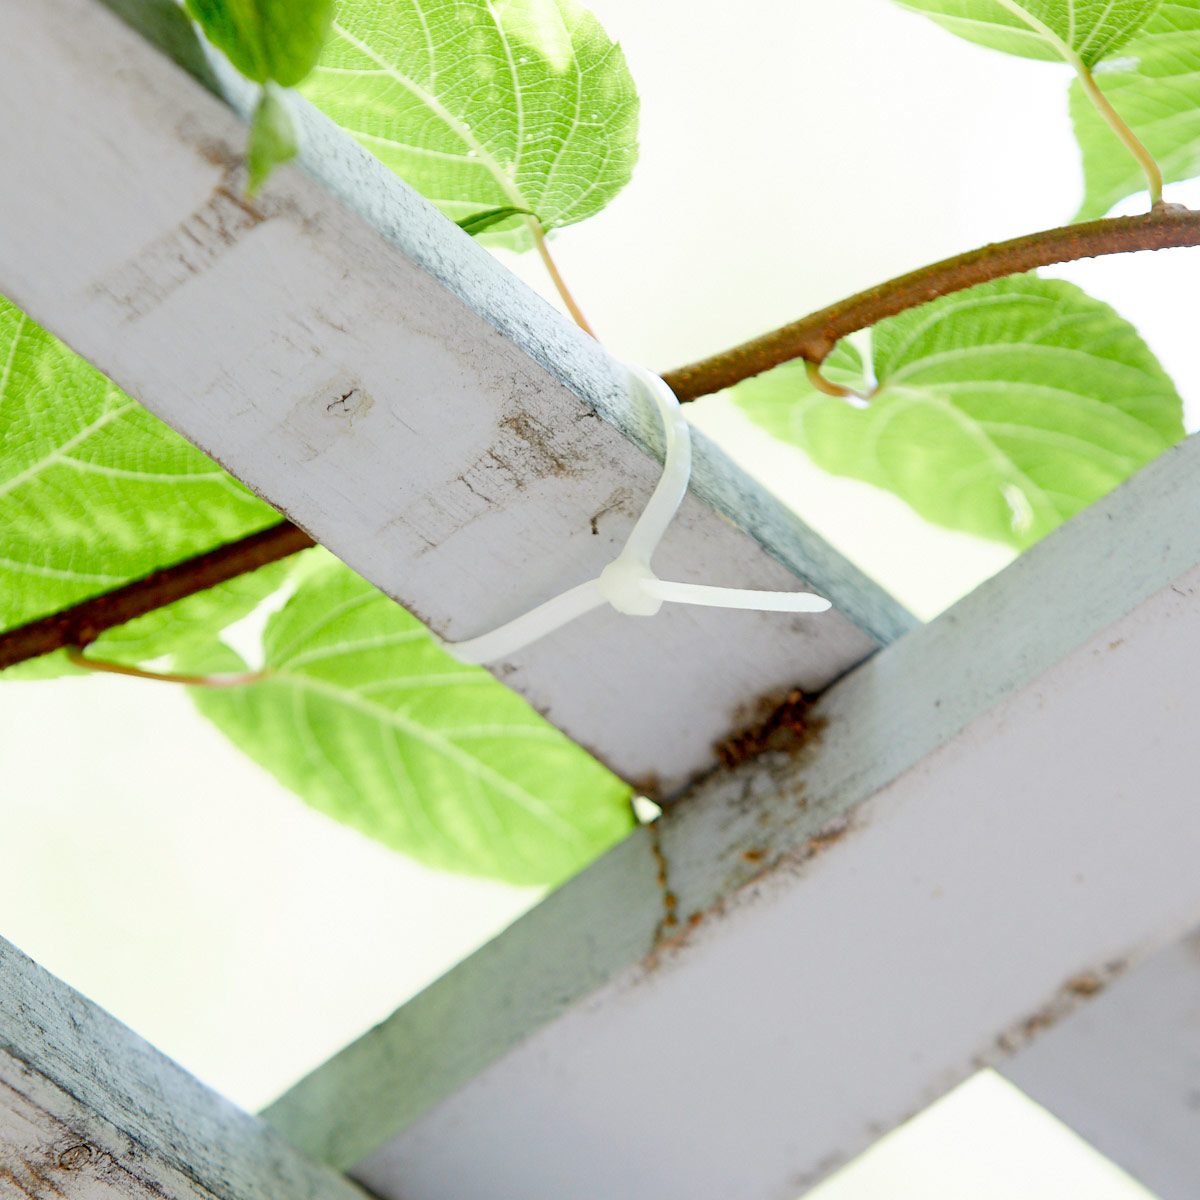 Control your climbing plants with zip ties